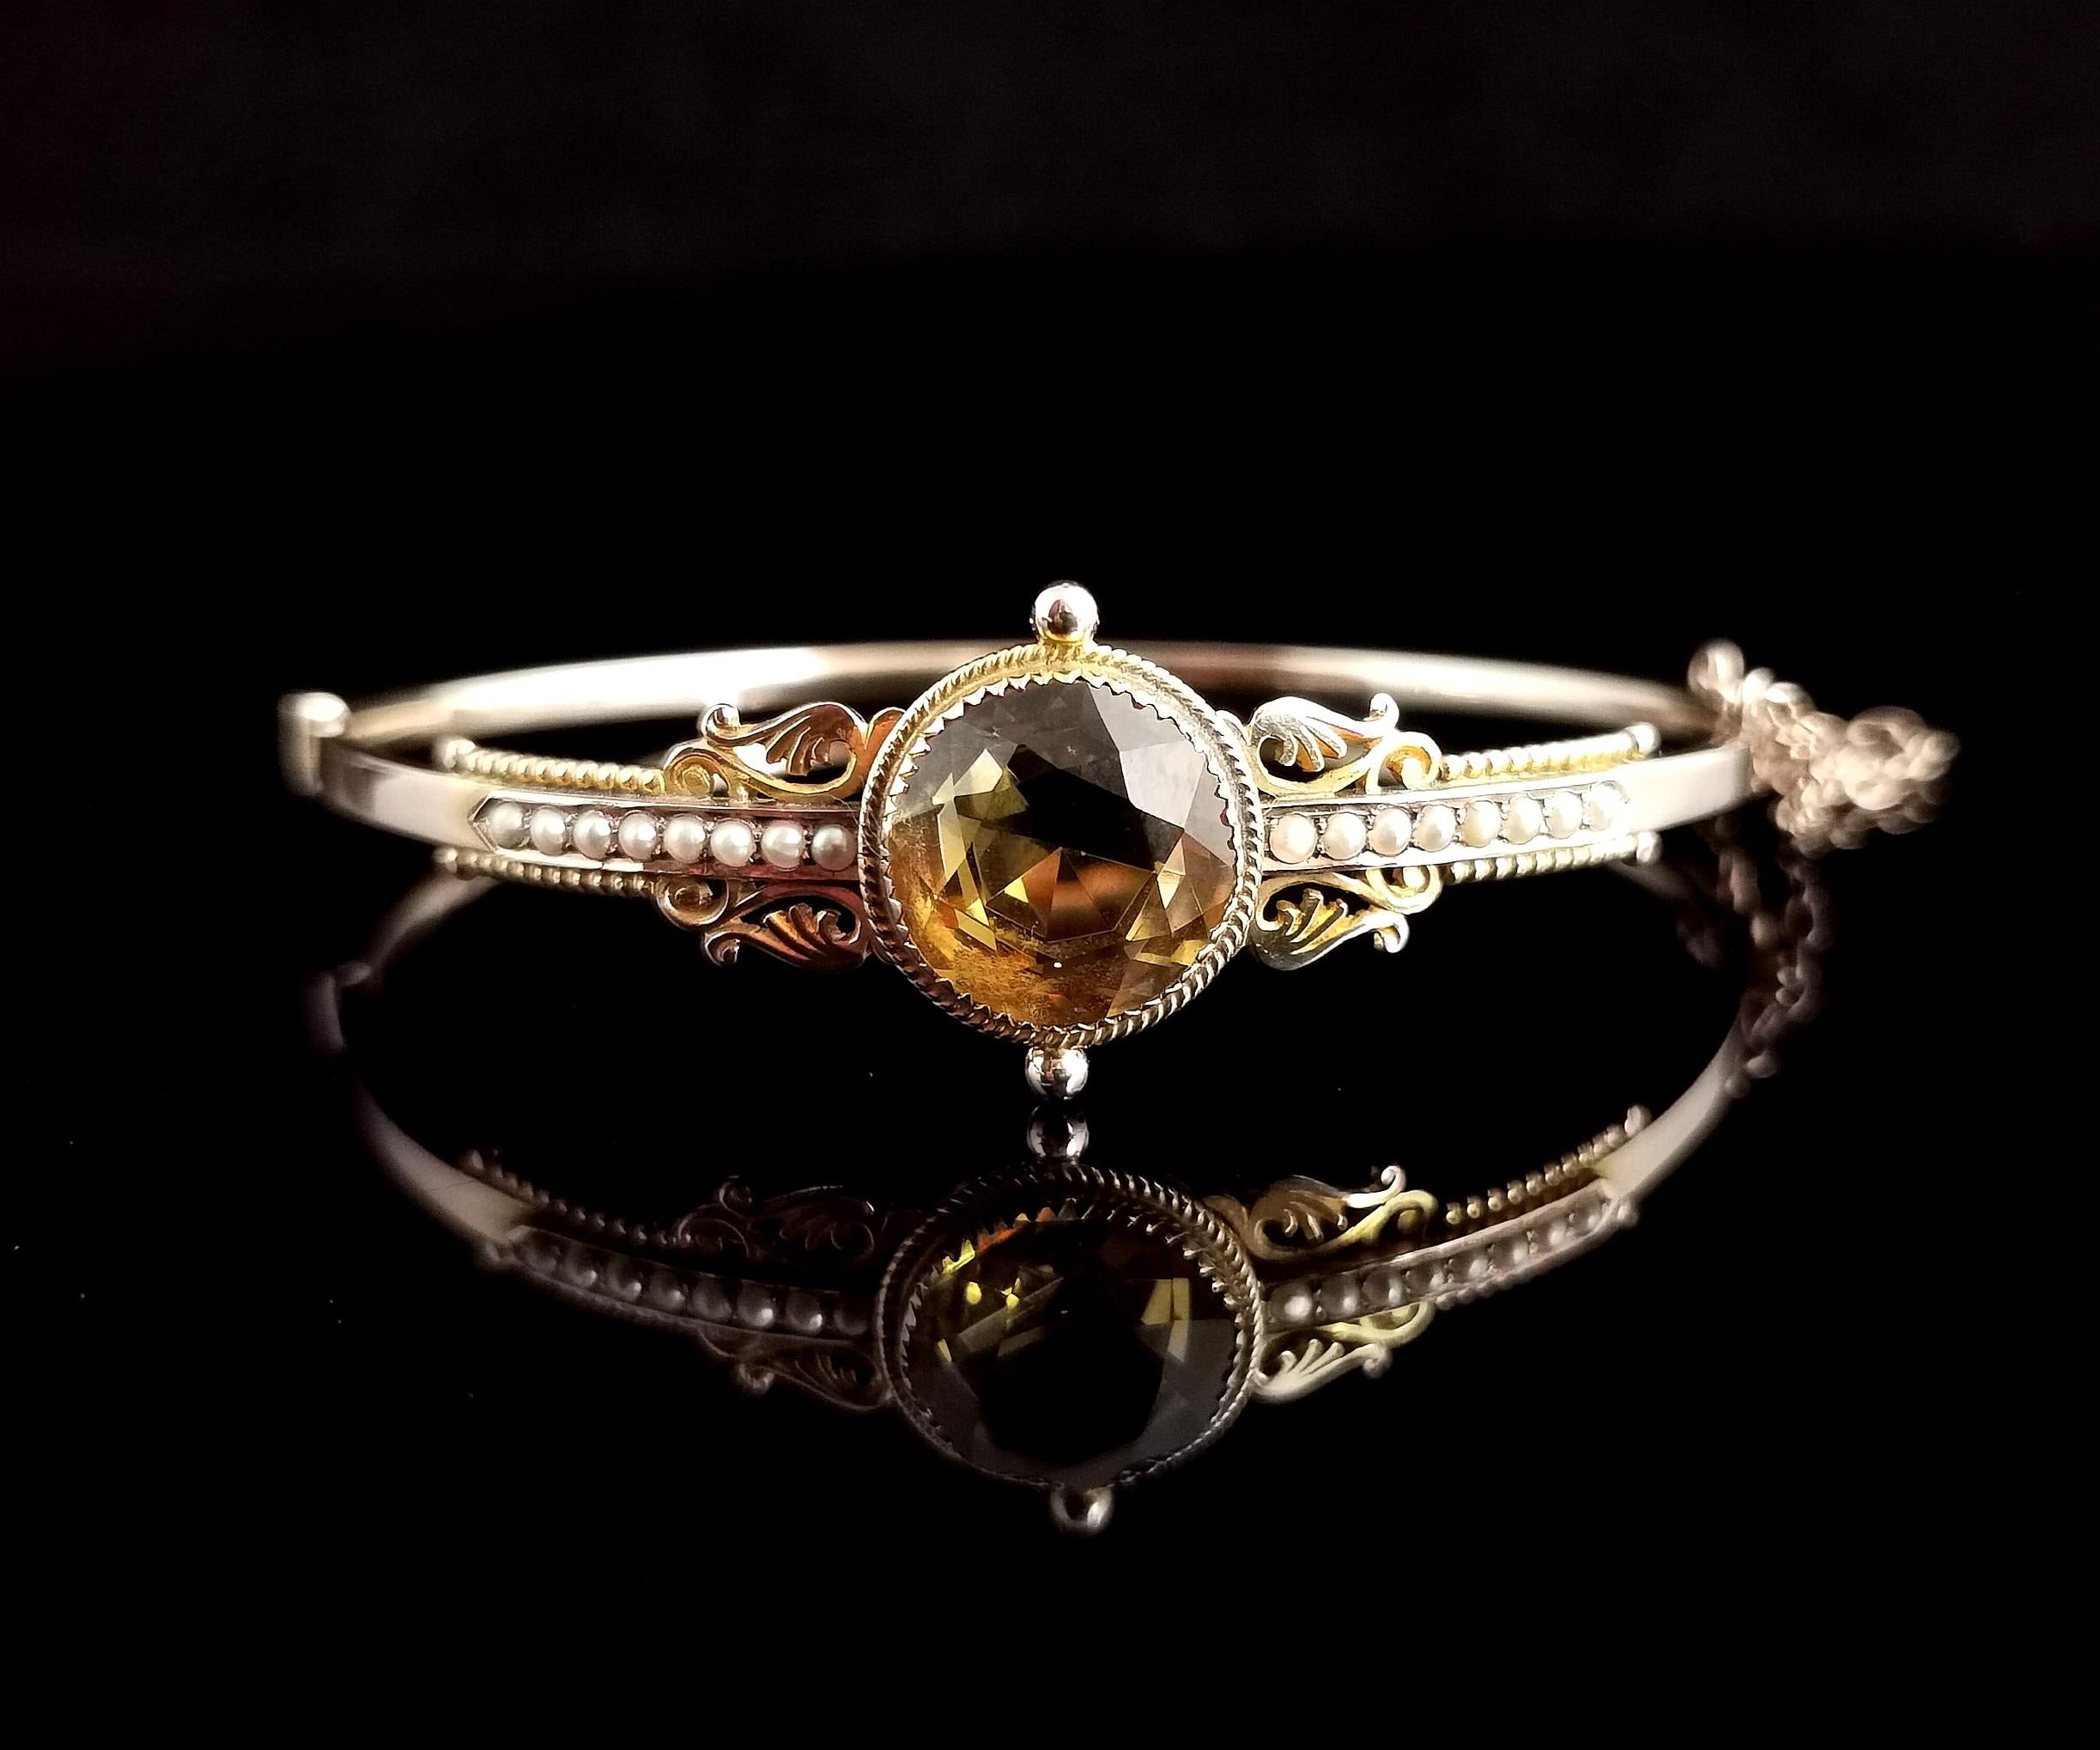 A beautiful antique, late Victorian era, 9 karat yellow gold, Citrine and seed pearl bangle.

A pretty piece with Etruscan revival vibes, it has a large round cut rich yellow citrine set centre front with rows of creamy seed pearls either side.

The